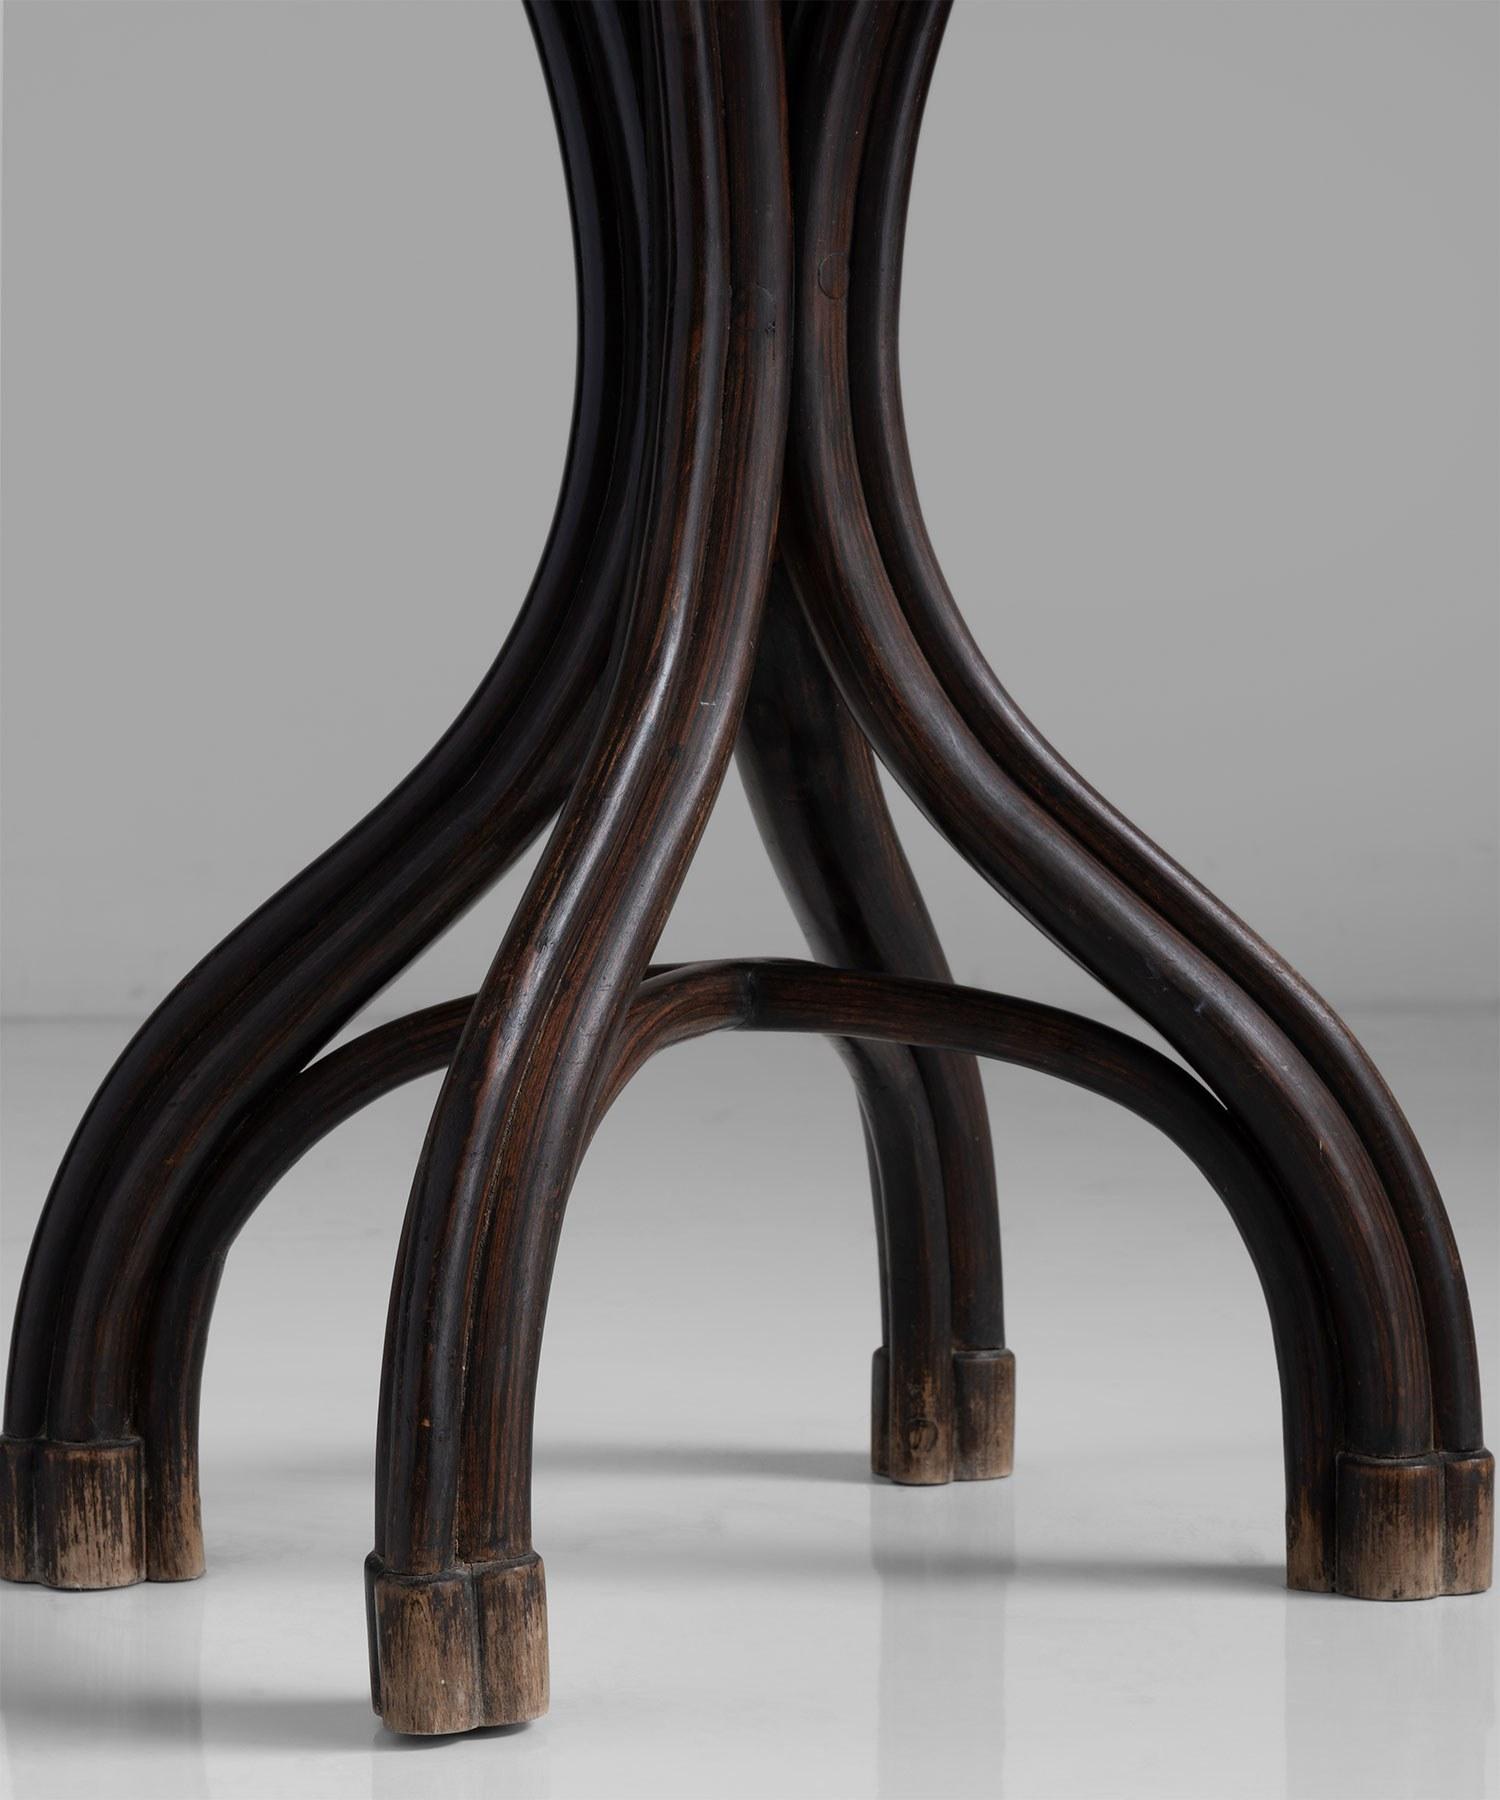 Austrian Bentwood with Marble Top Side Table by Thonet, Austria circa 1870